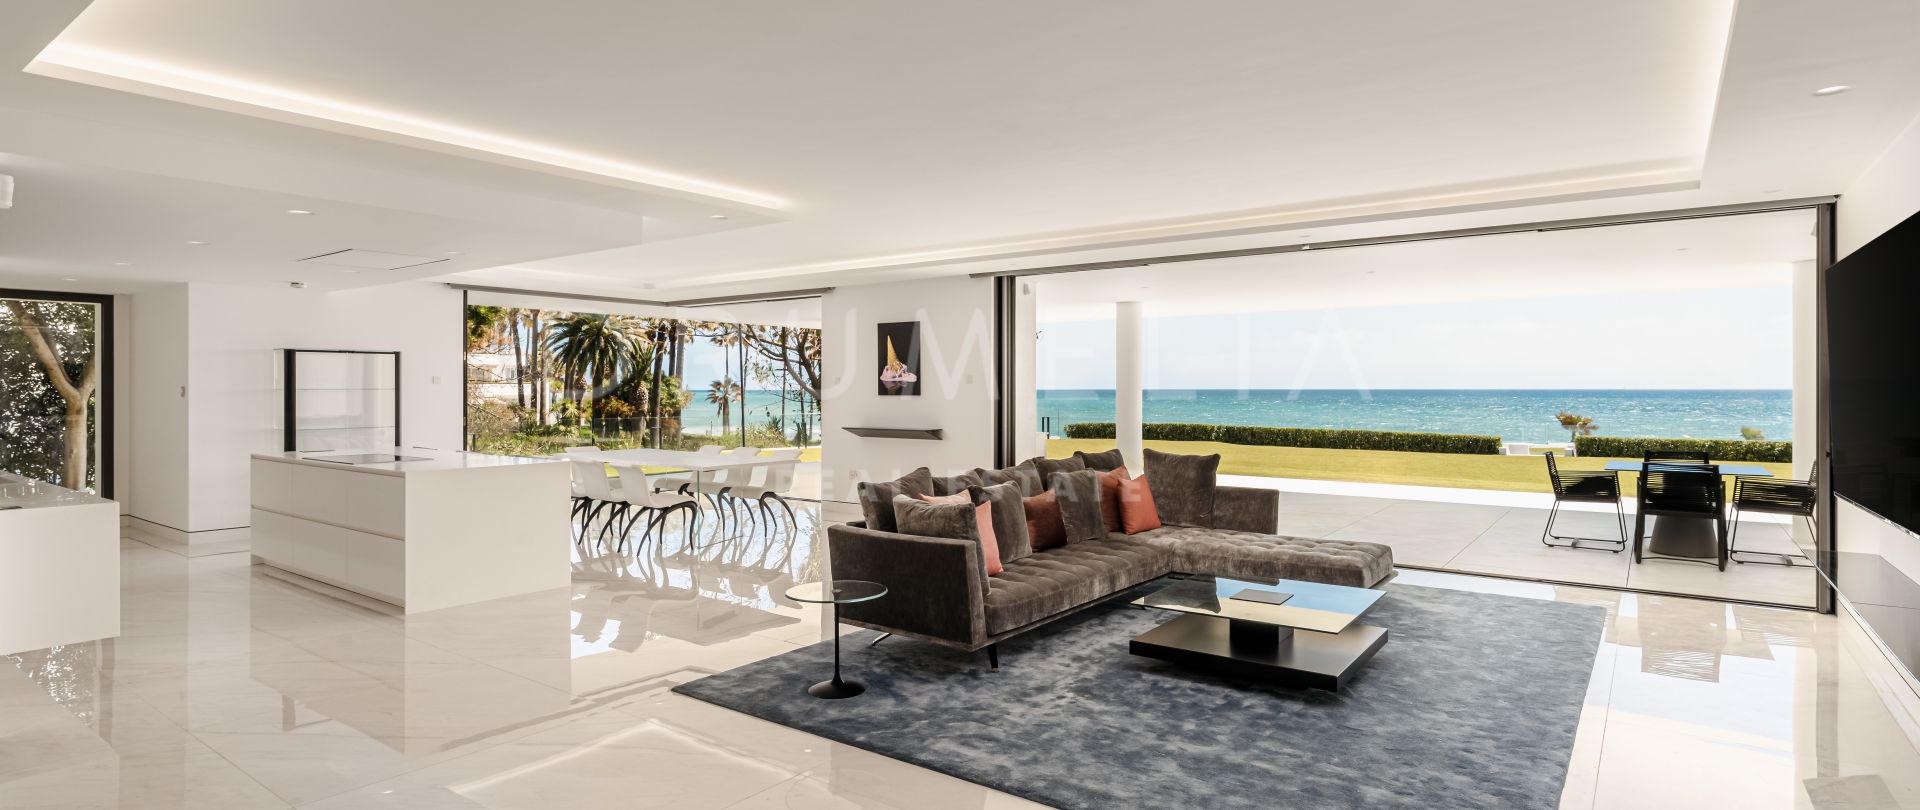 Emare Pearl - New Outstanding Modern Luxury Apartment Right on Sea-Front, Emare, Estepona